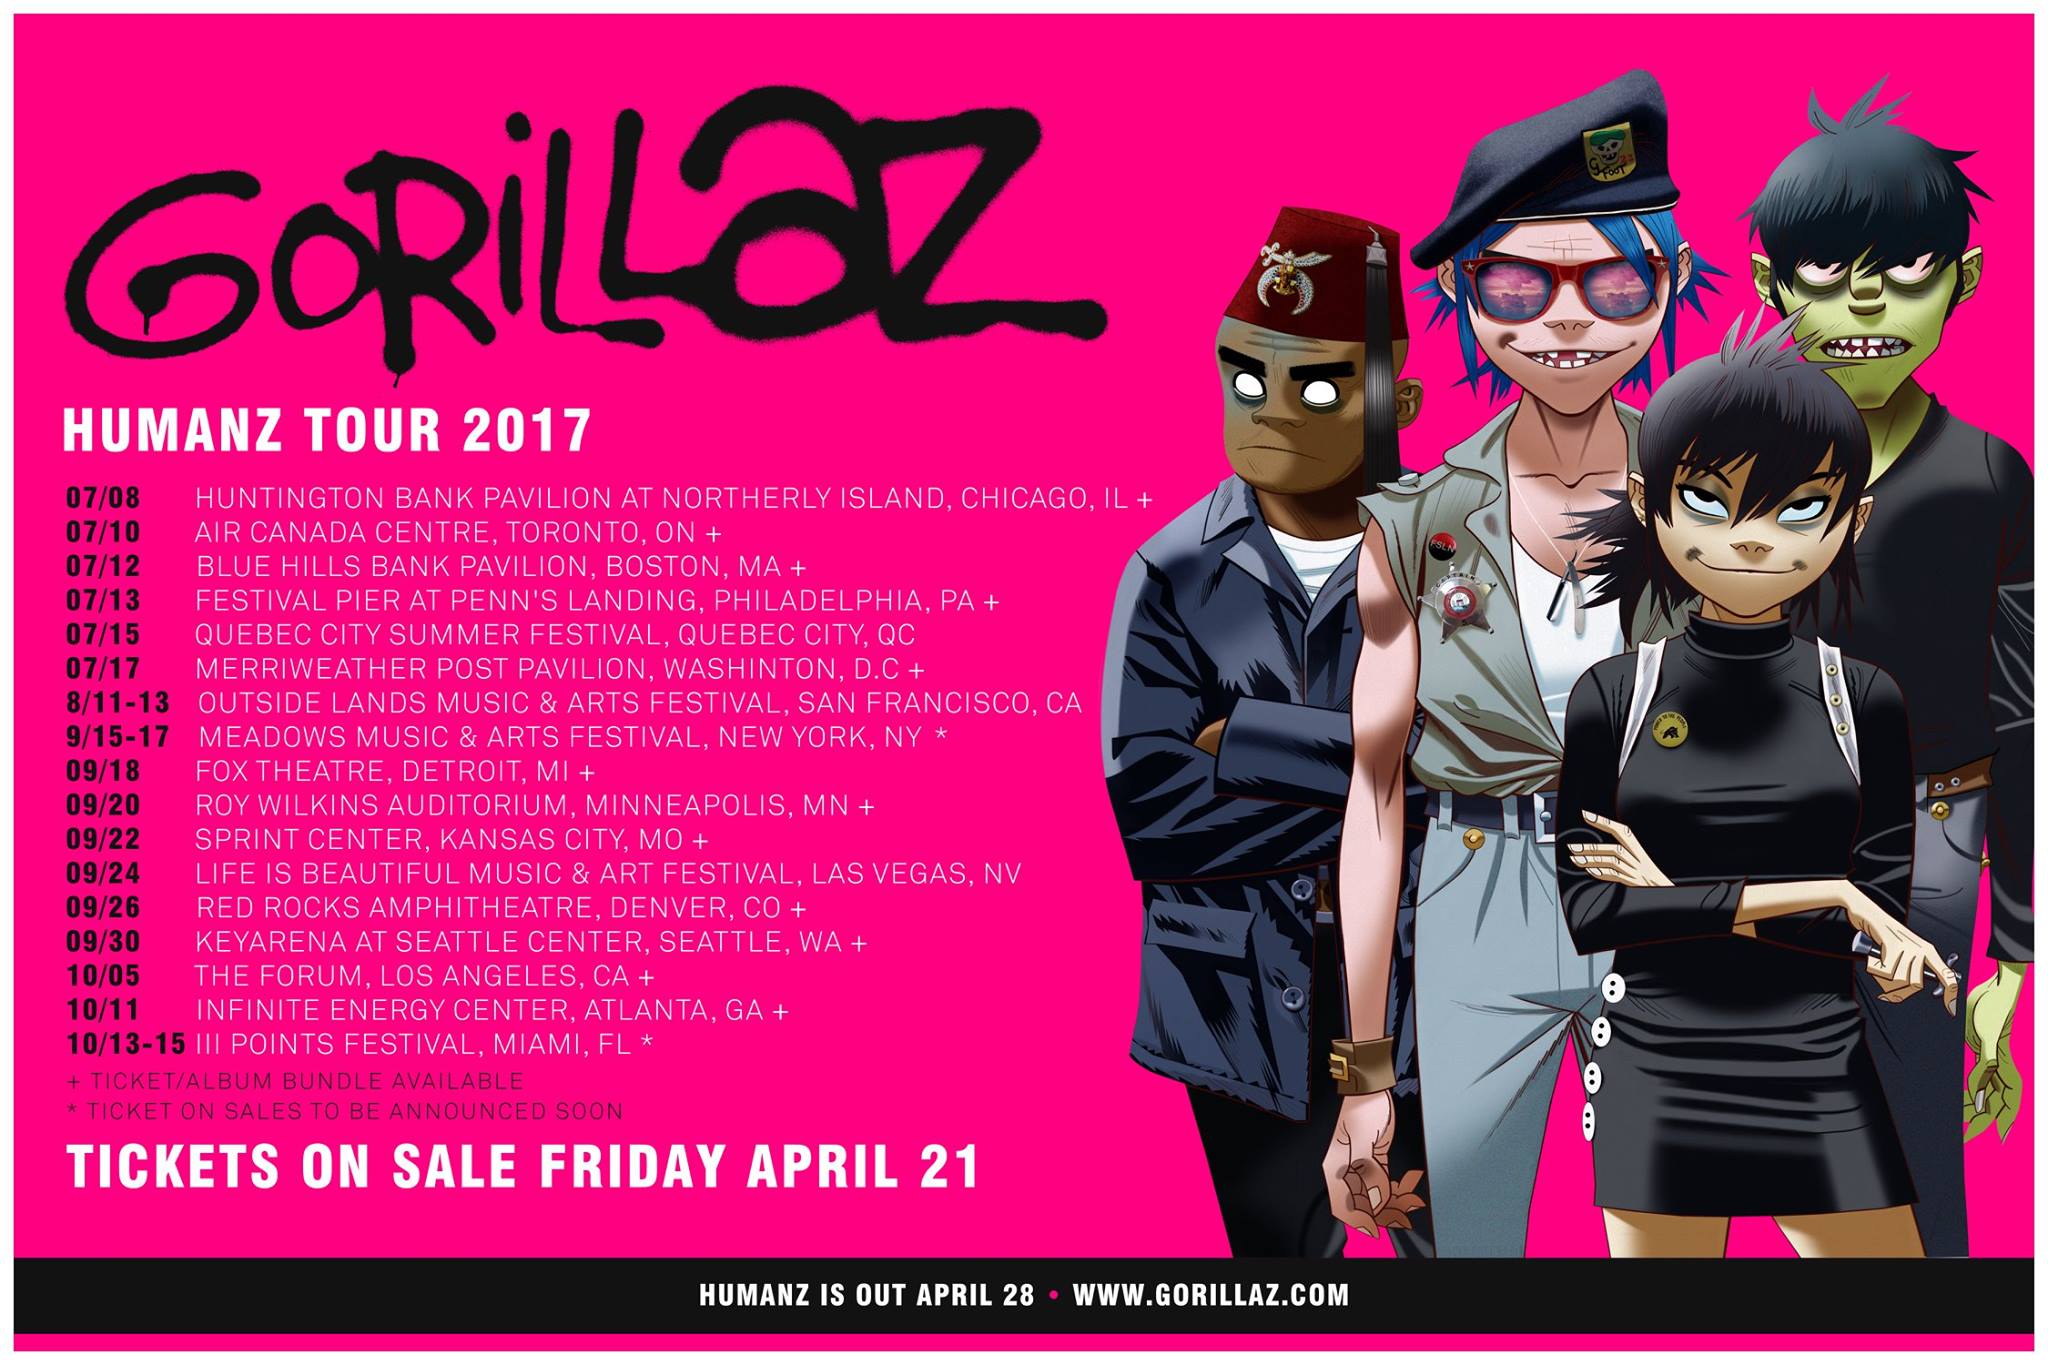 who is on tour with gorillaz